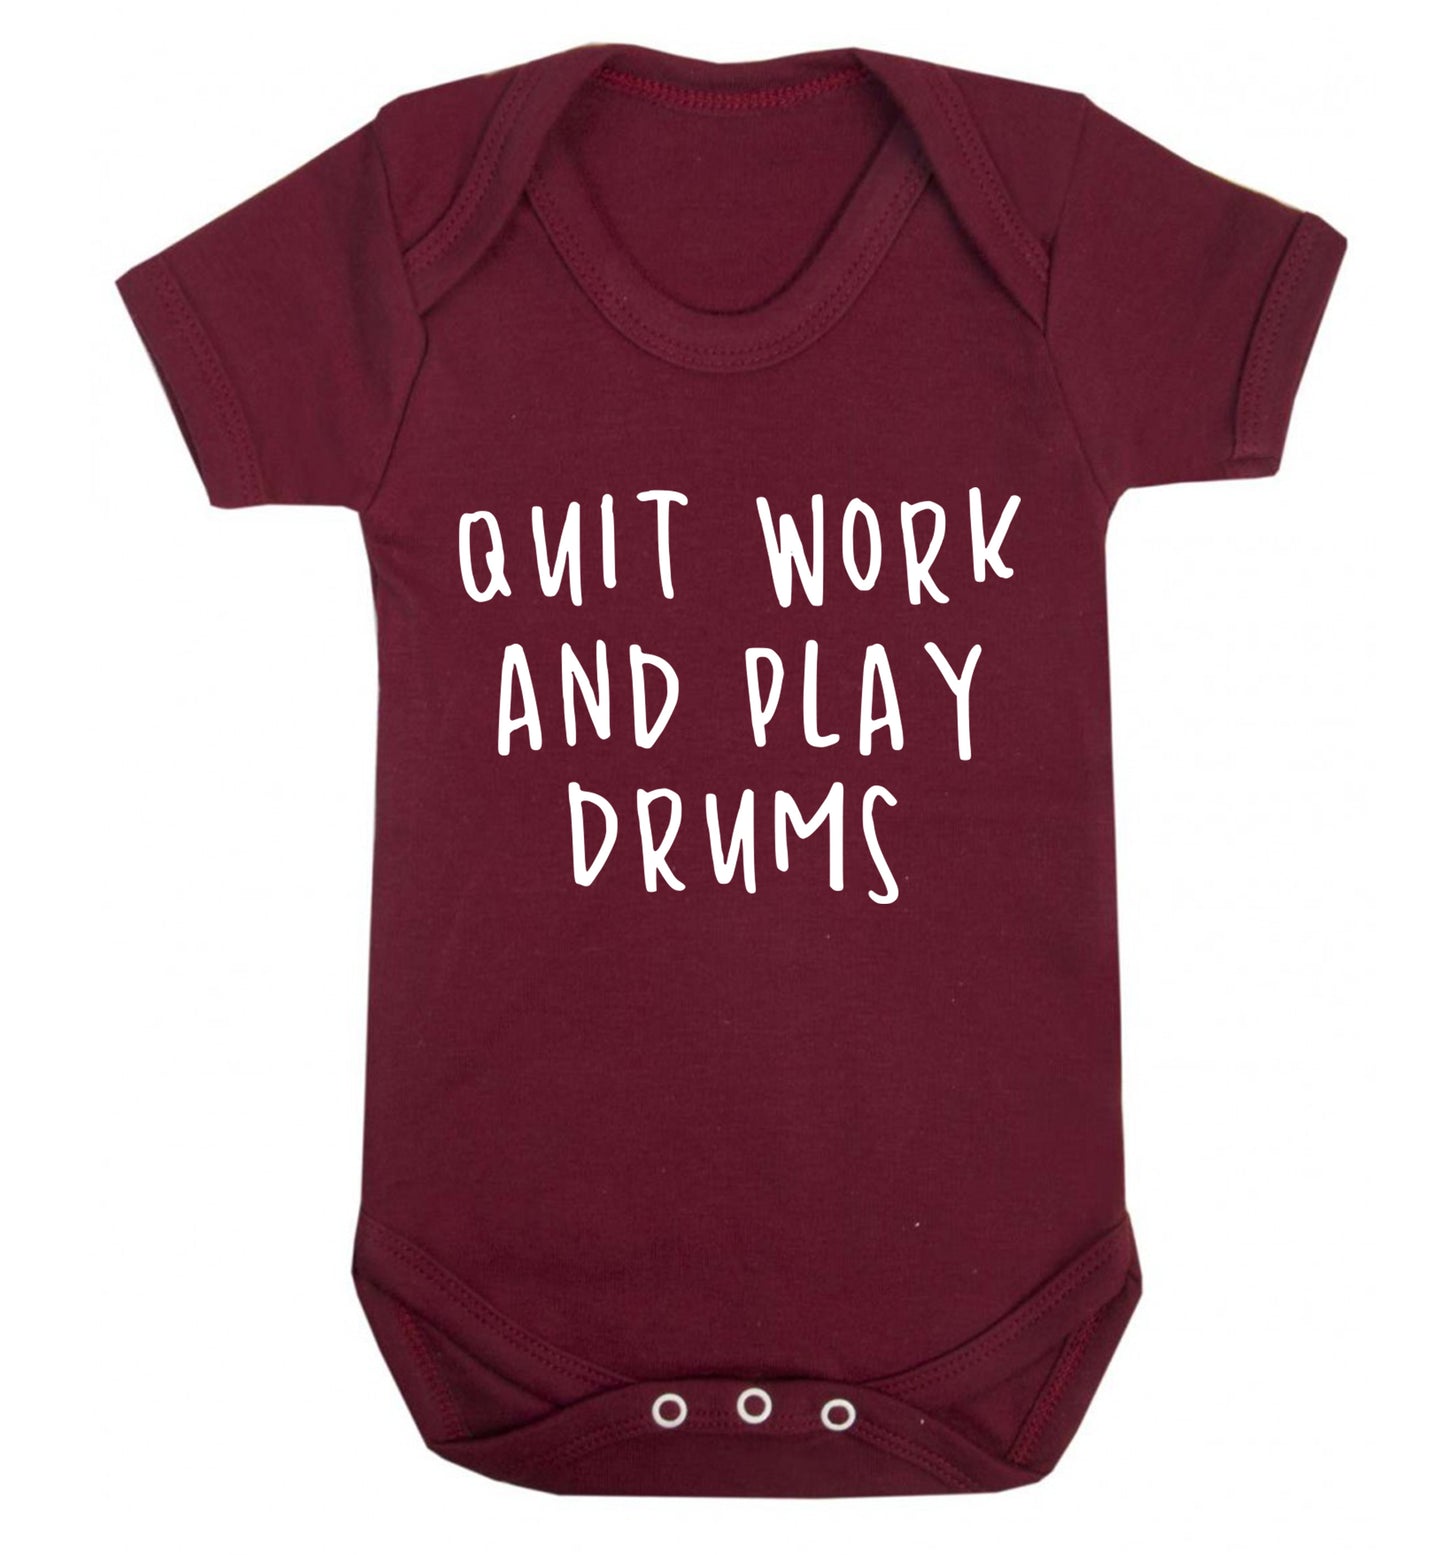 Quit work and play drums Baby Vest maroon 18-24 months